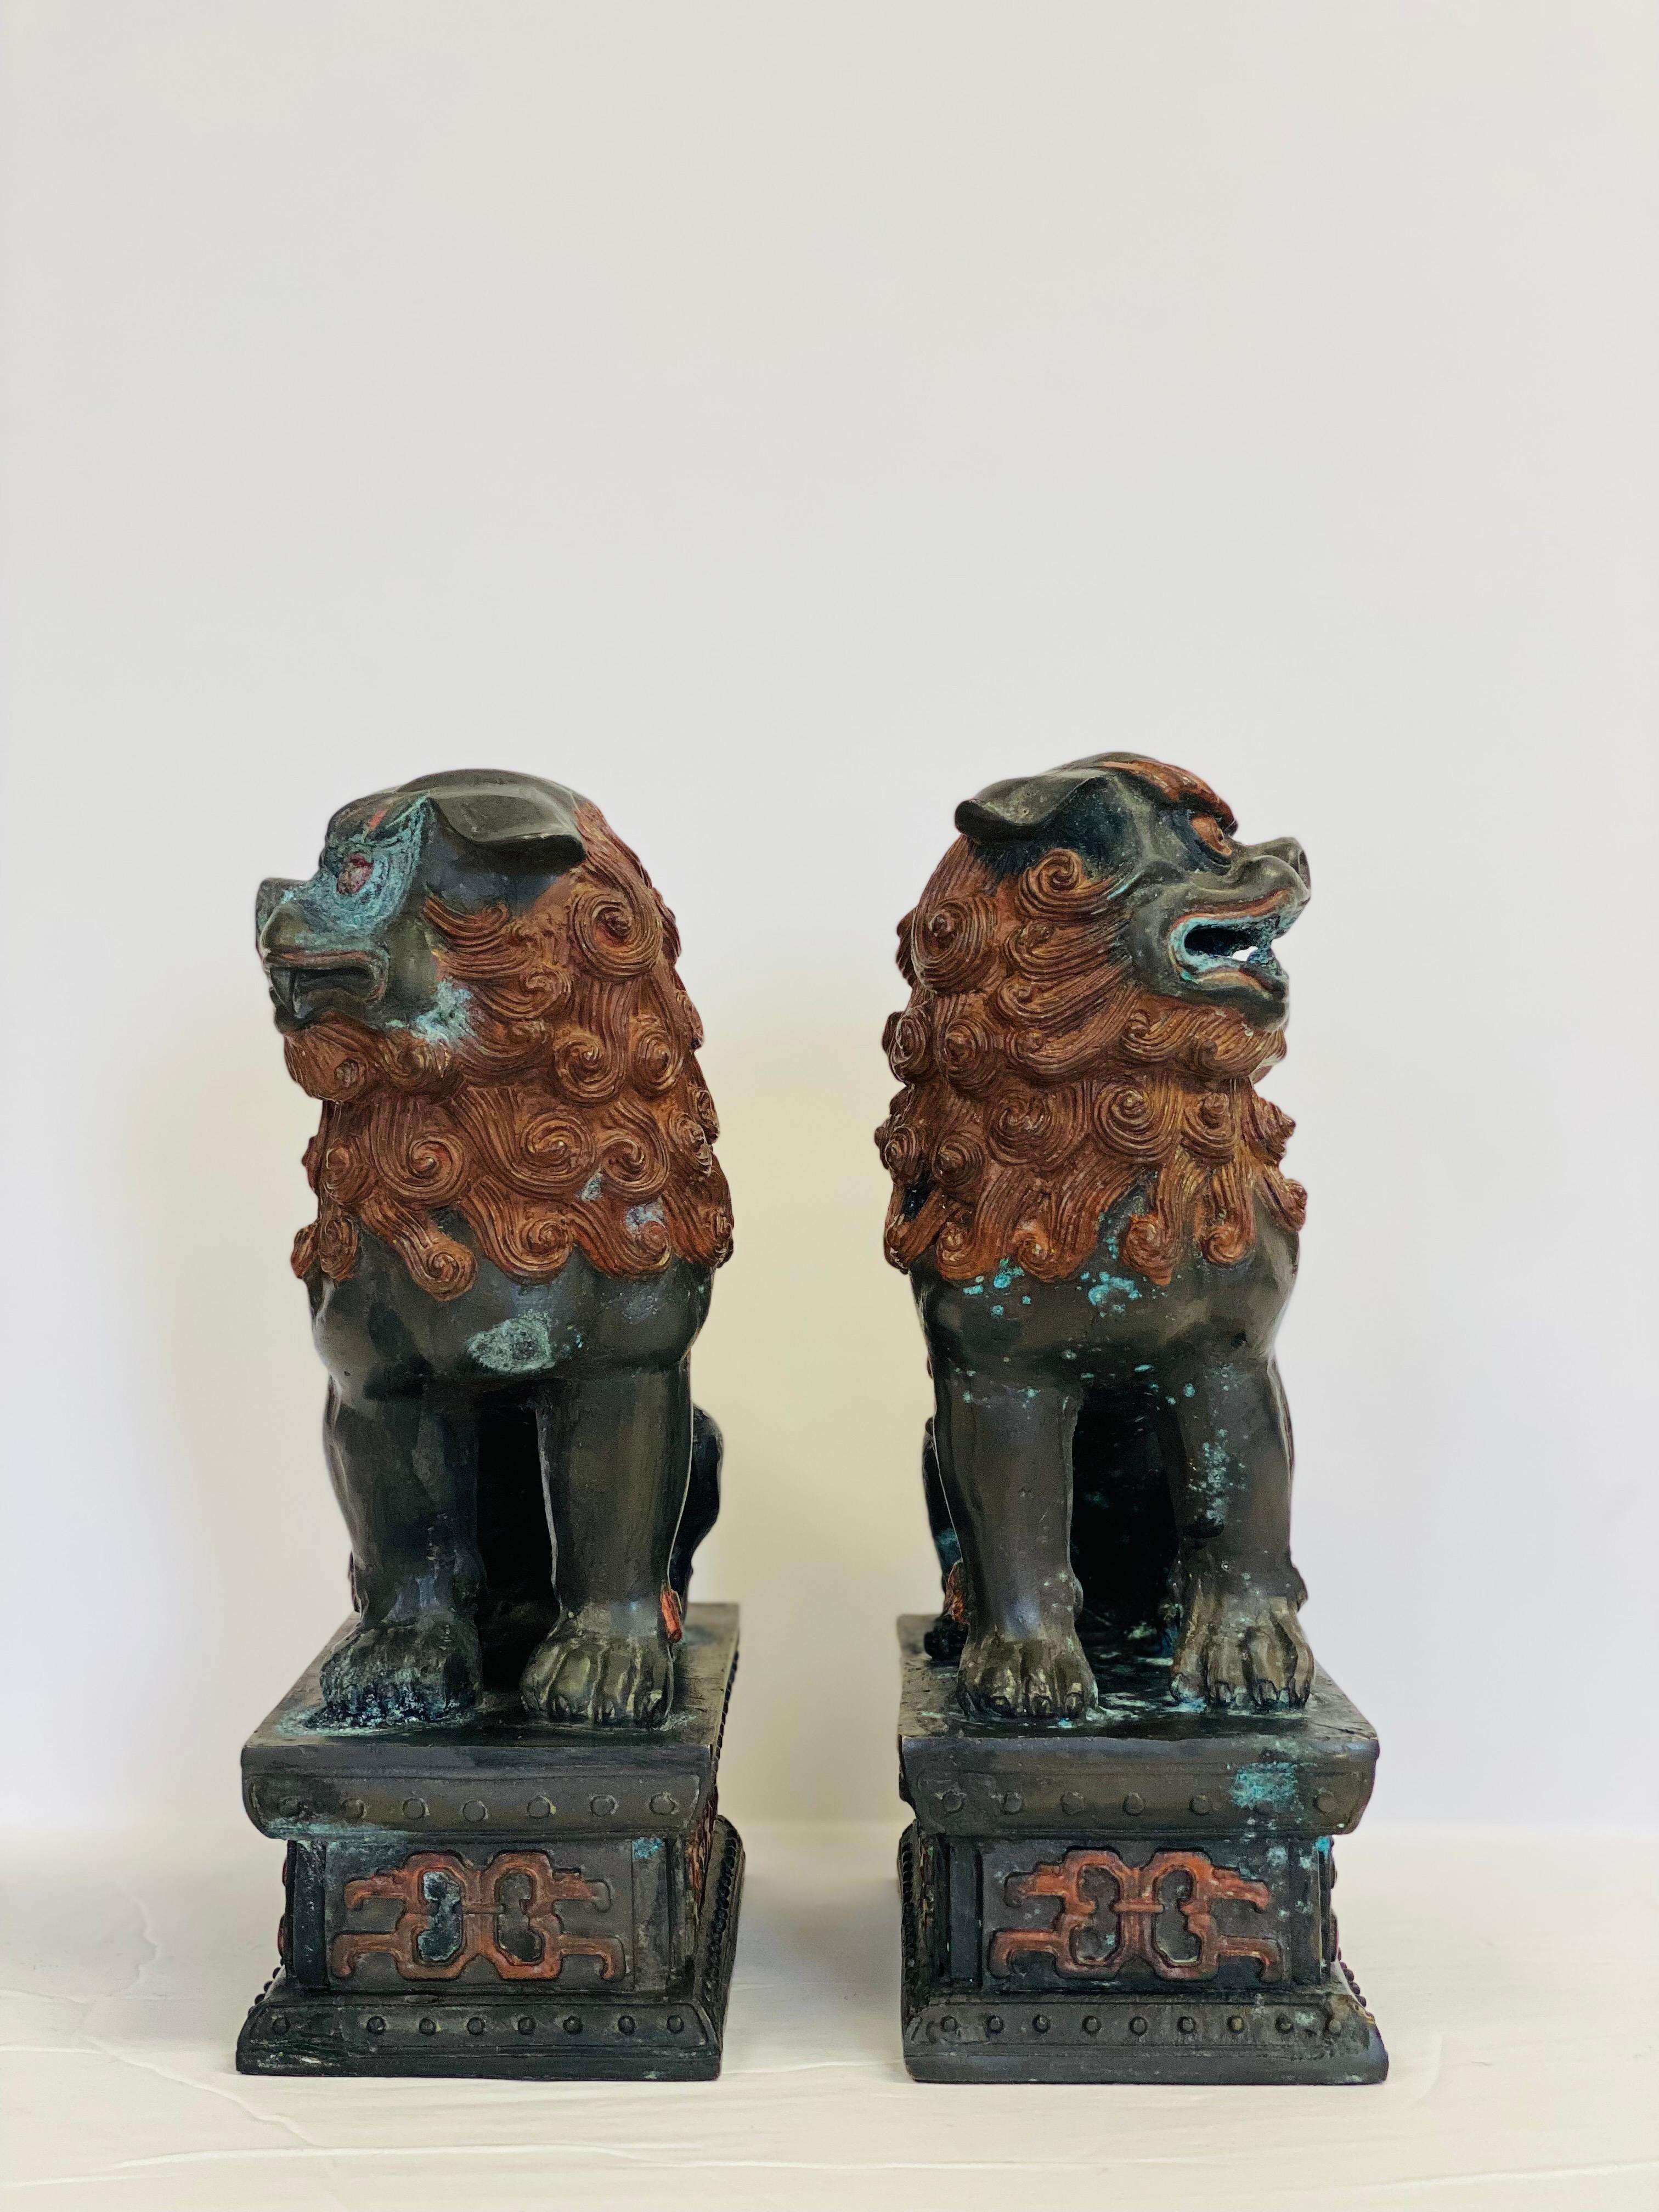 We are very pleased to offer an exquisite pair of foo dog bookends, circa the 1960s. Traditional Eastern culture blends with timeless style in this unique set of heavy-weight cooper Chinese guardian lions. The natural changes that happen to copper